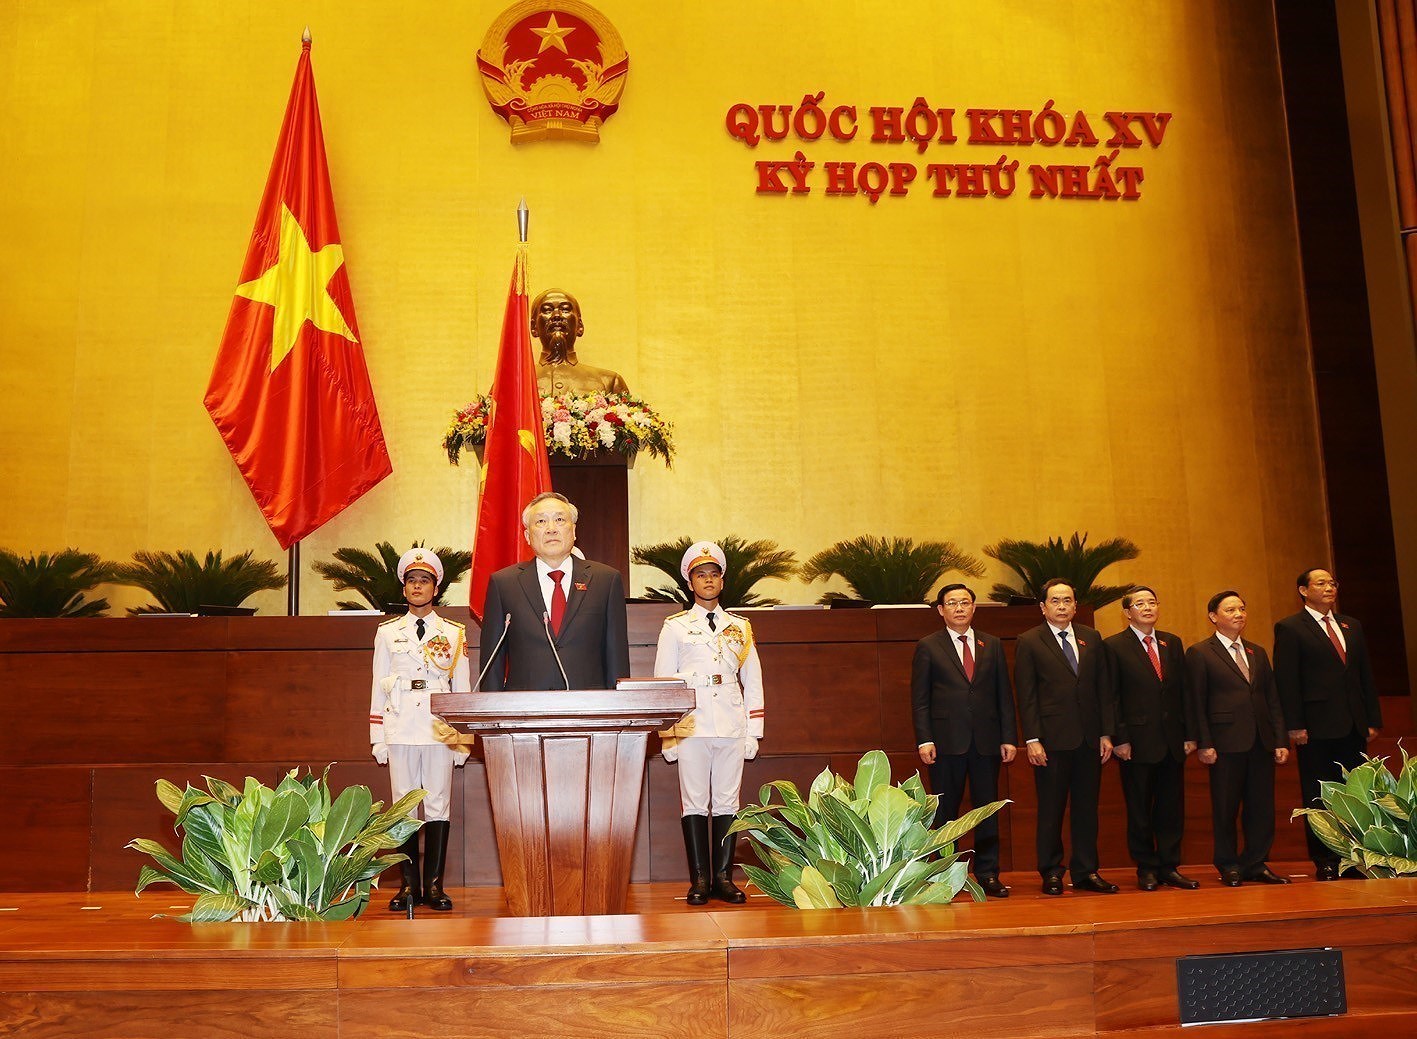 Nguyen Hoa Binh elected as Chief Justice of Supreme People’s Court for the 2021–2026 hinh anh 1